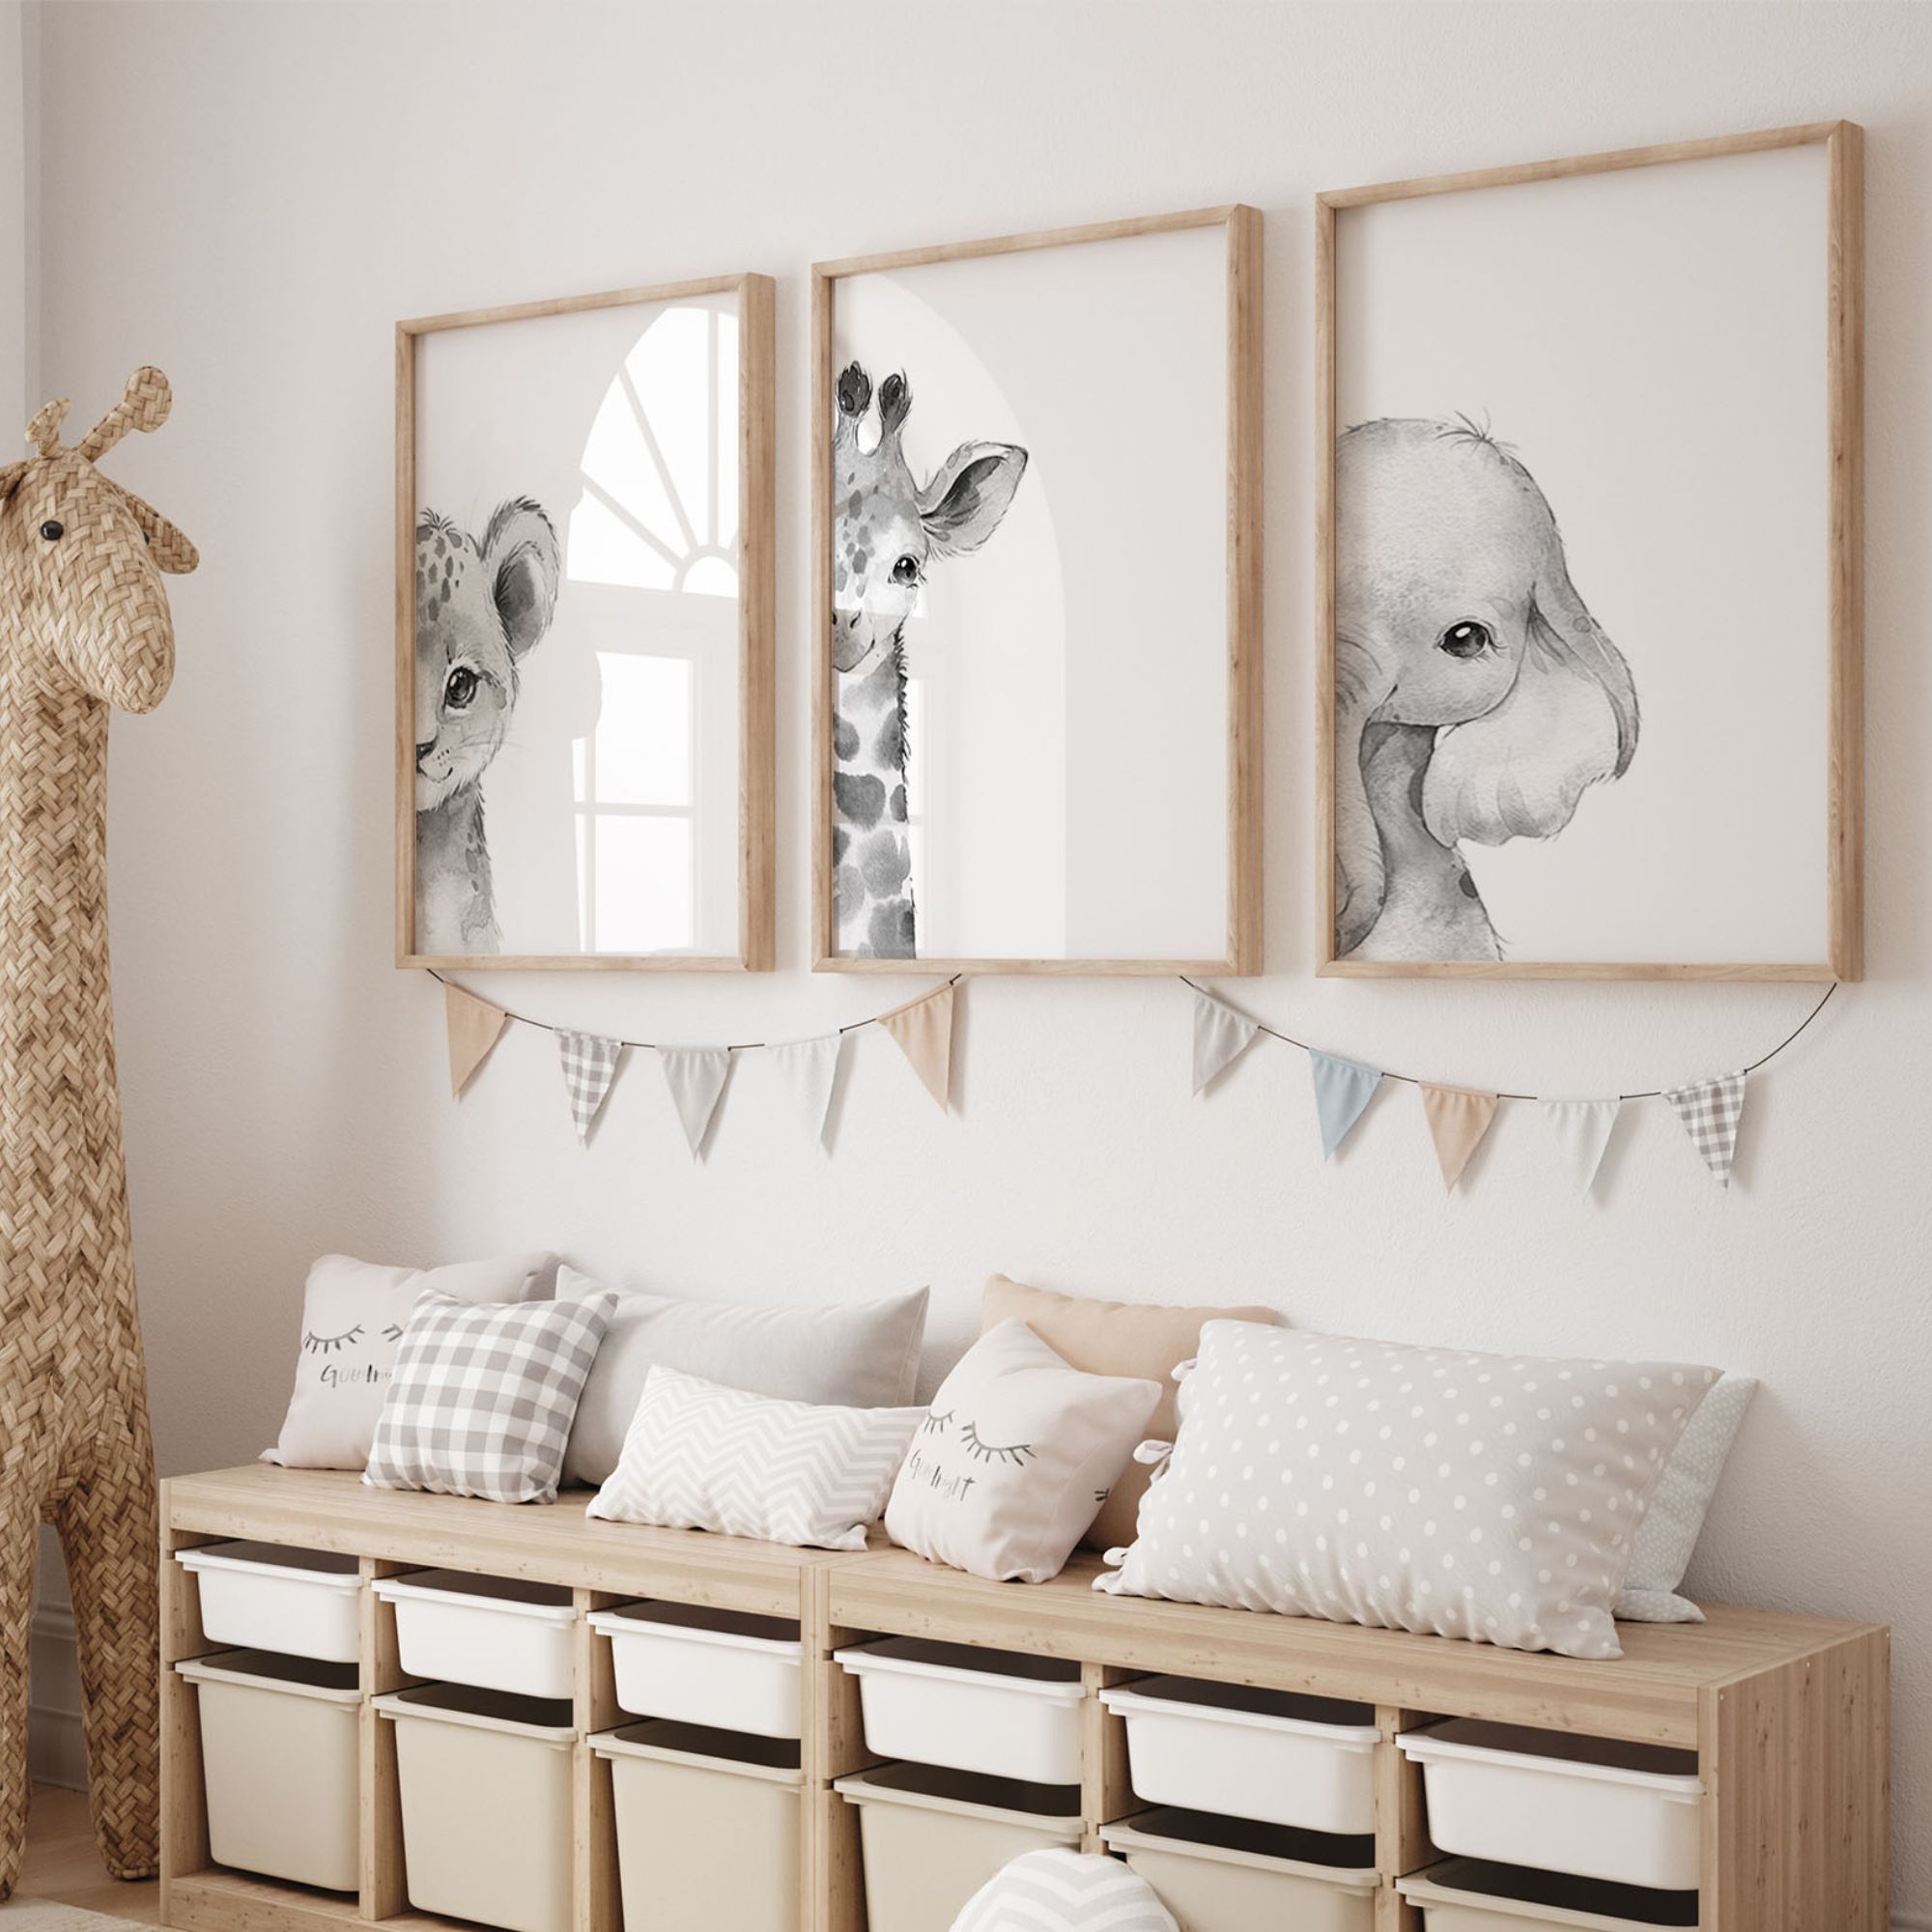 Stylish Ideas for Decorating Your Baby’s Nursery